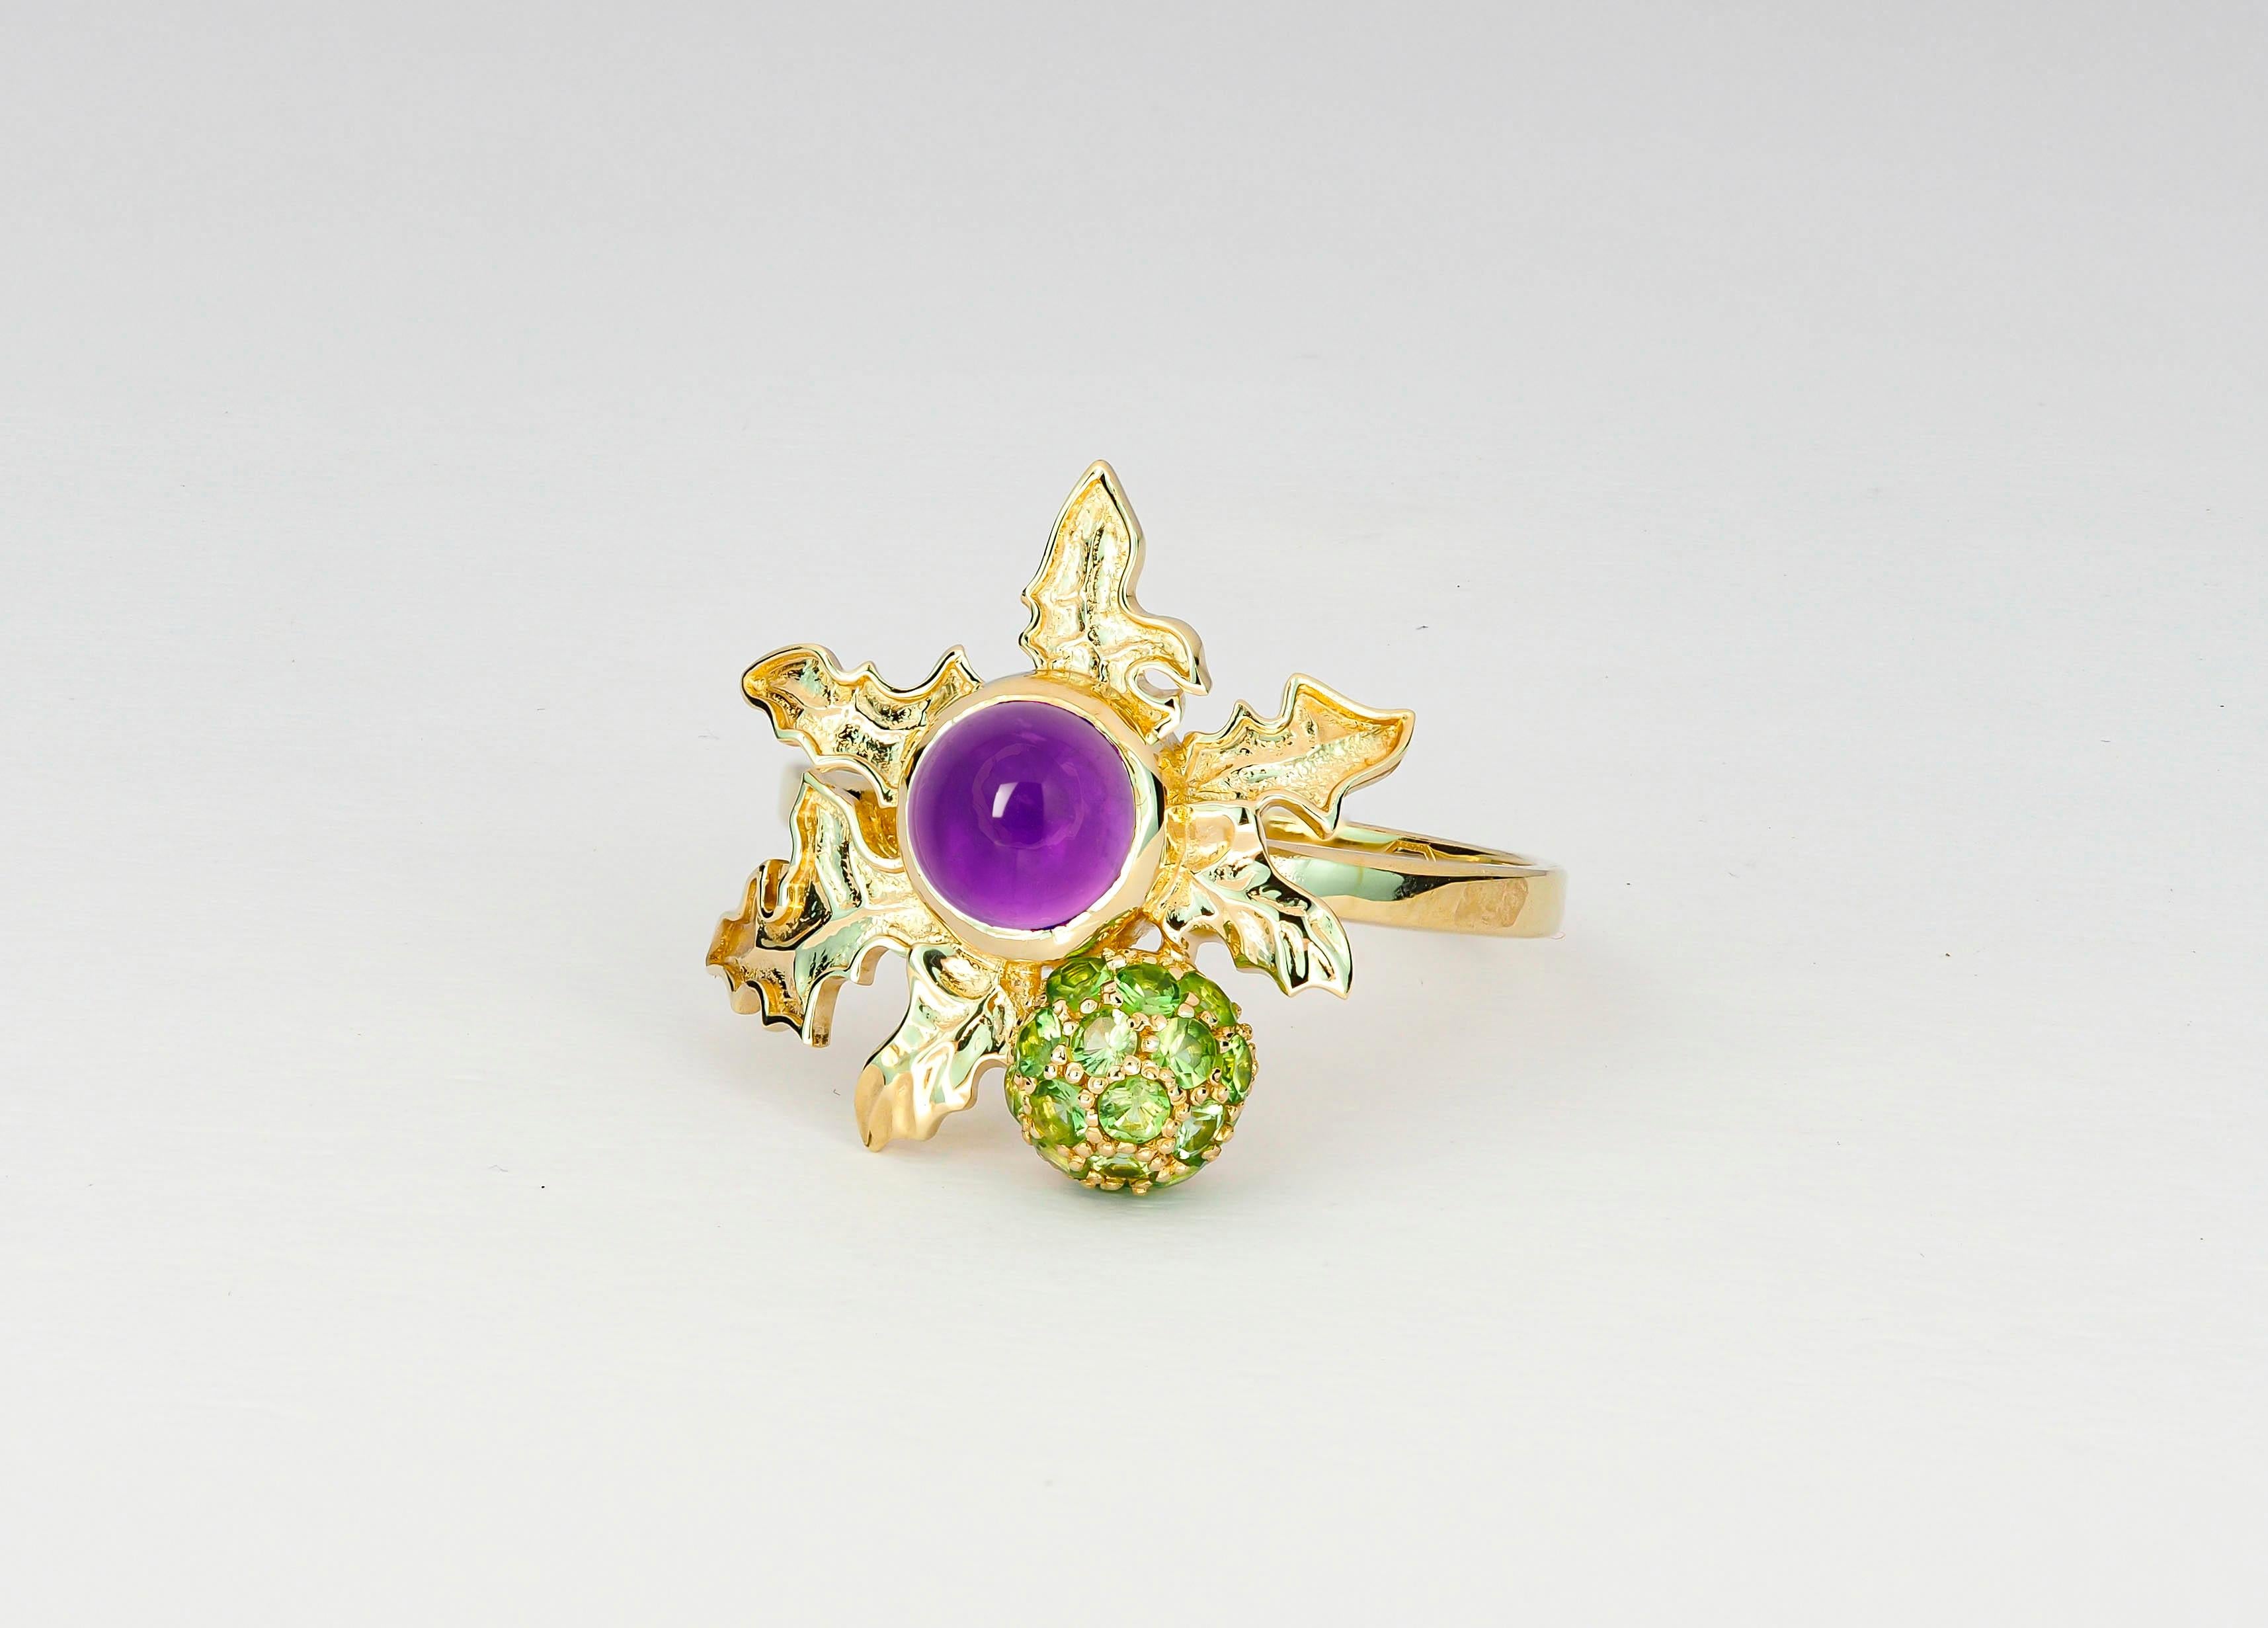 14 K Gold Scottish Thistle Ring with Amethyst and Peridots 2